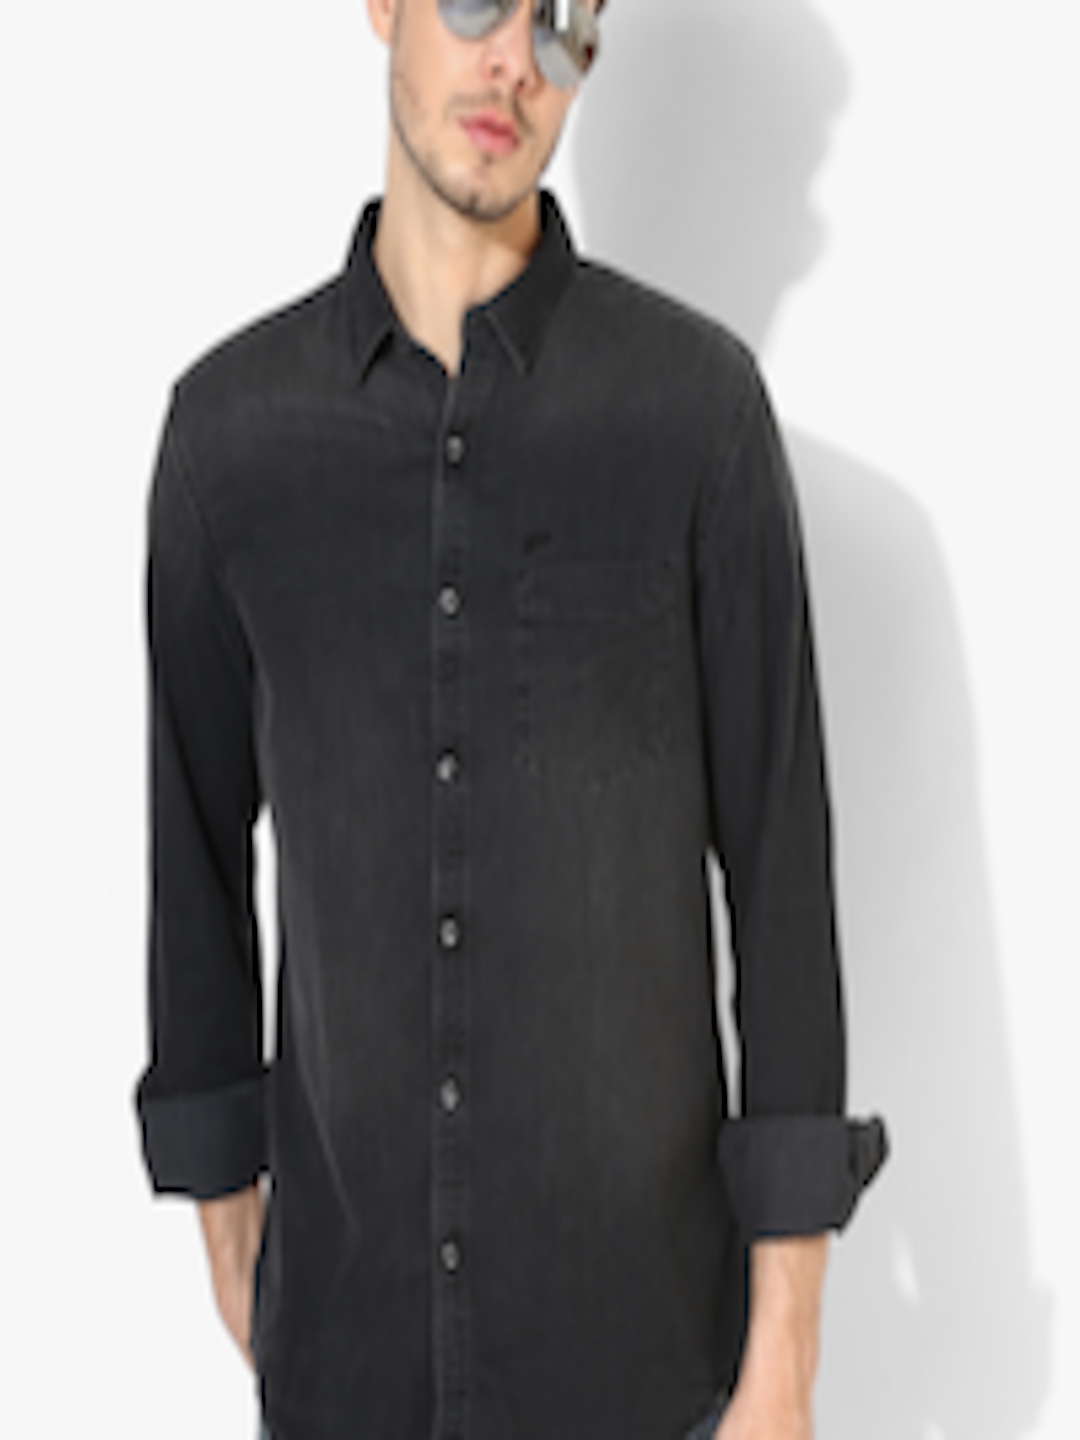 Buy Charcoal Solid Slim Fit Casual Shirt - Shirts for Men 7929665 | Myntra